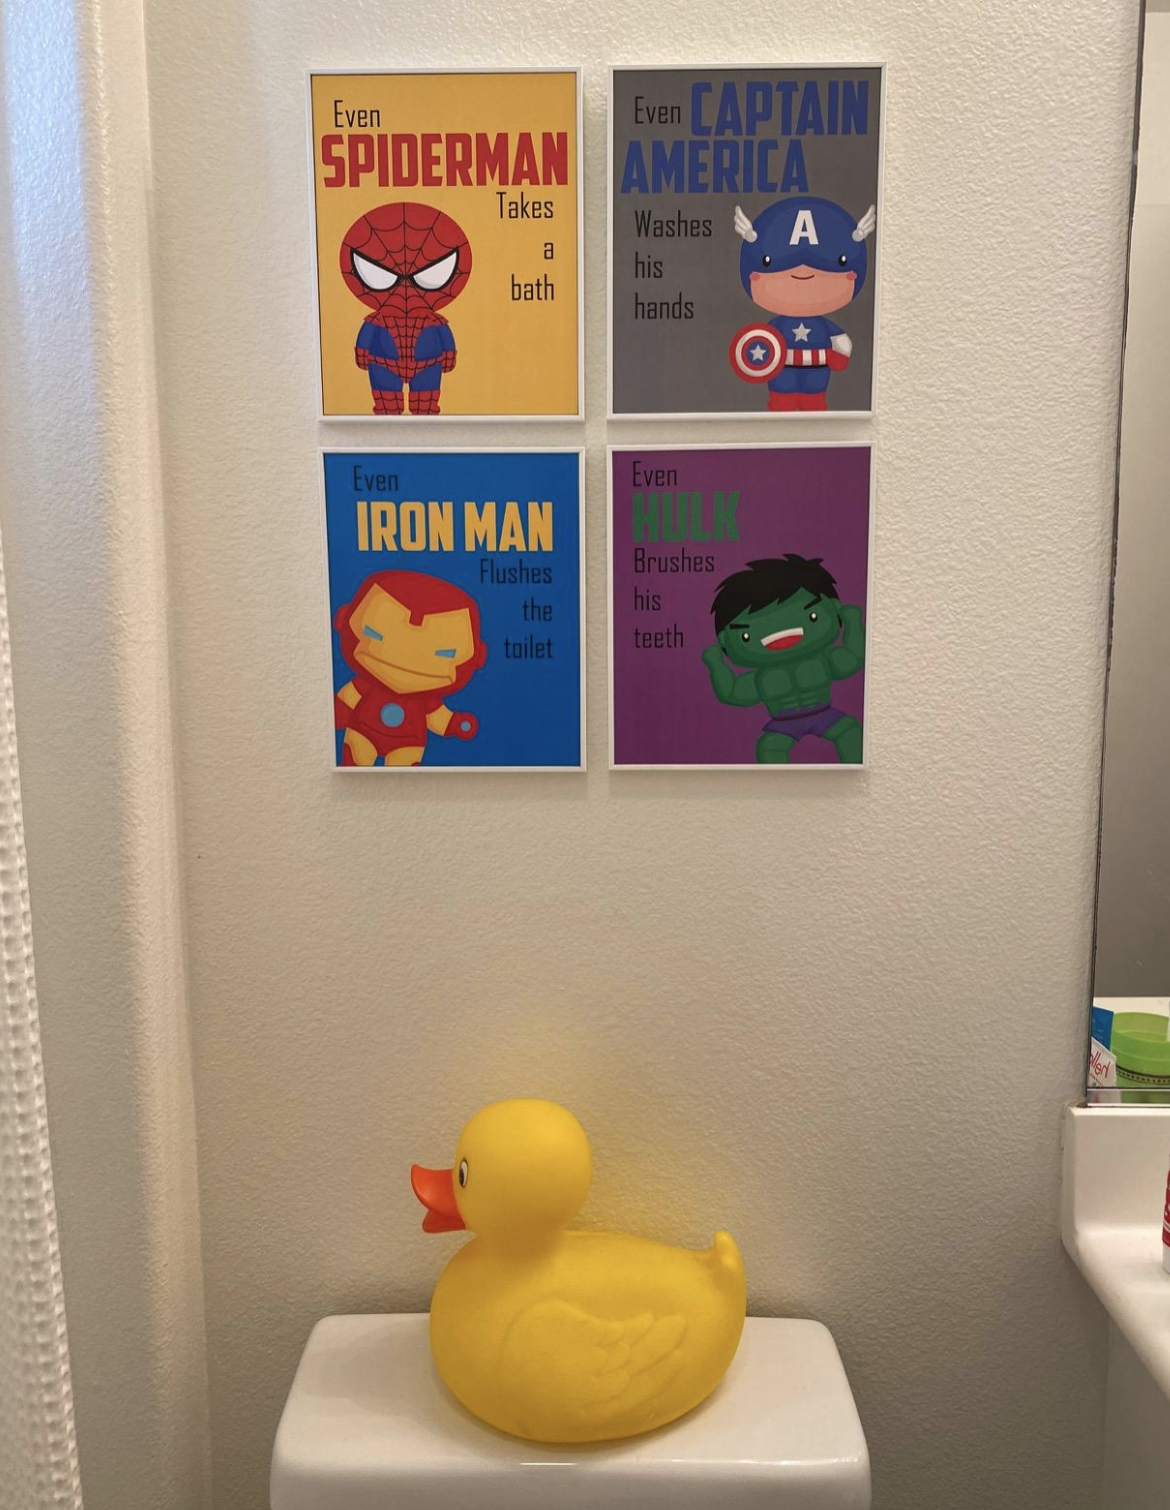 Four photos with child-like cartoons of superheroes. Reading clockwise, the signs say &quot;Even Spiderman takes a bath,&quot; &quot;Even Captain America washes his hands,&quot; &quot;Even Iron Man Flushes the toilet,&quot; and &quot;Even Bulk brushes his teeth.&quot;